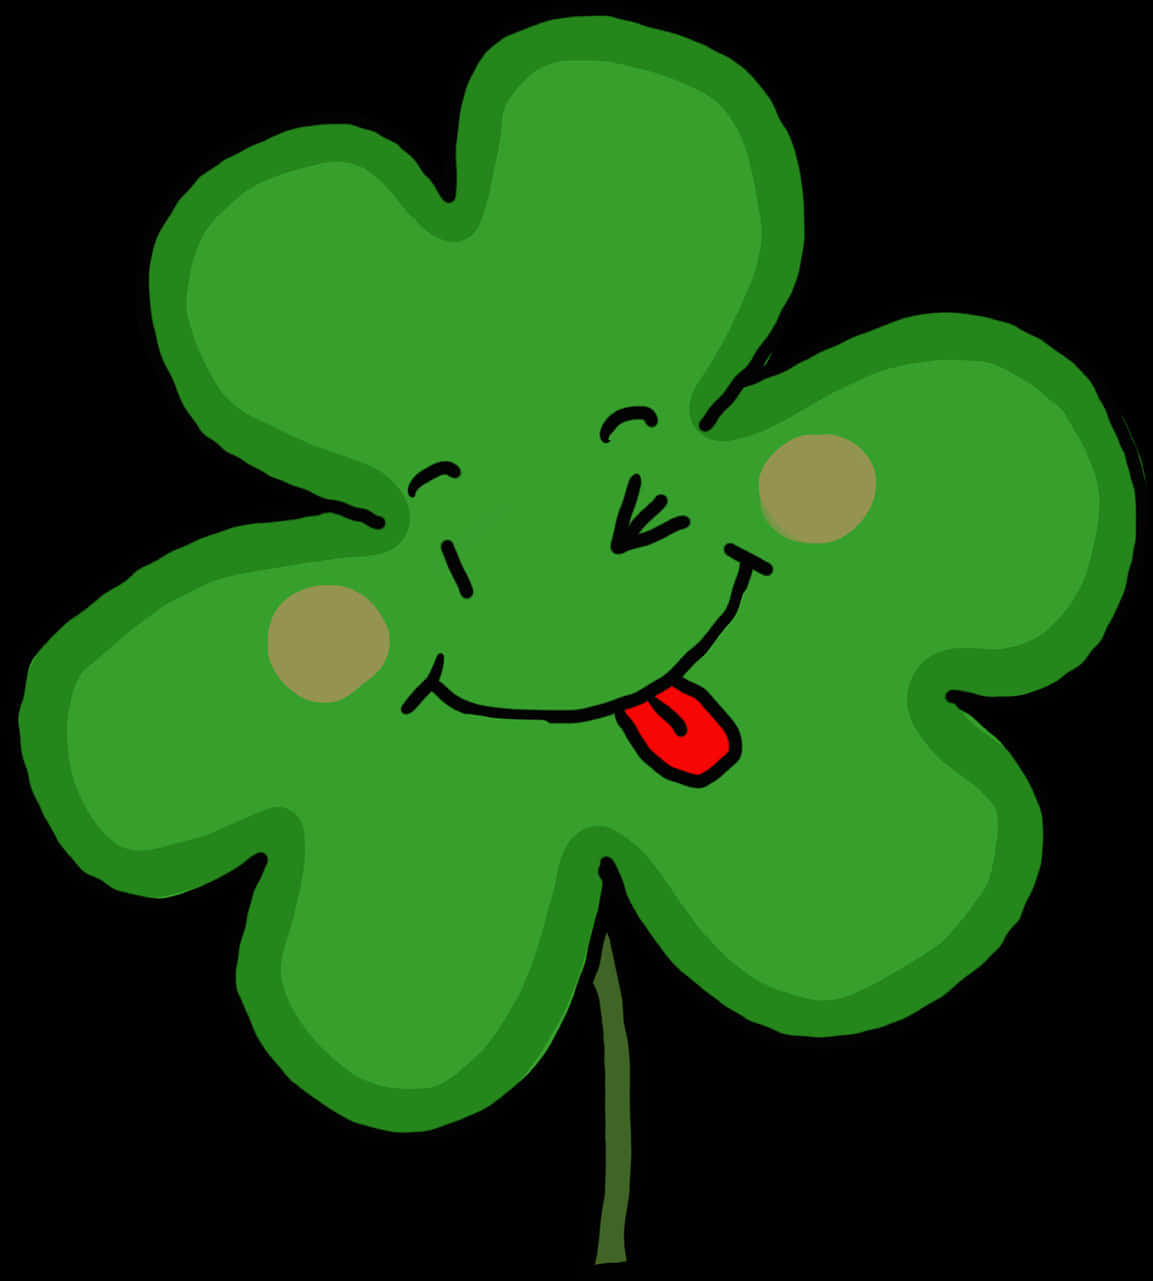 A Cartoon Of A Clover With A Face And Tongue Sticking Out